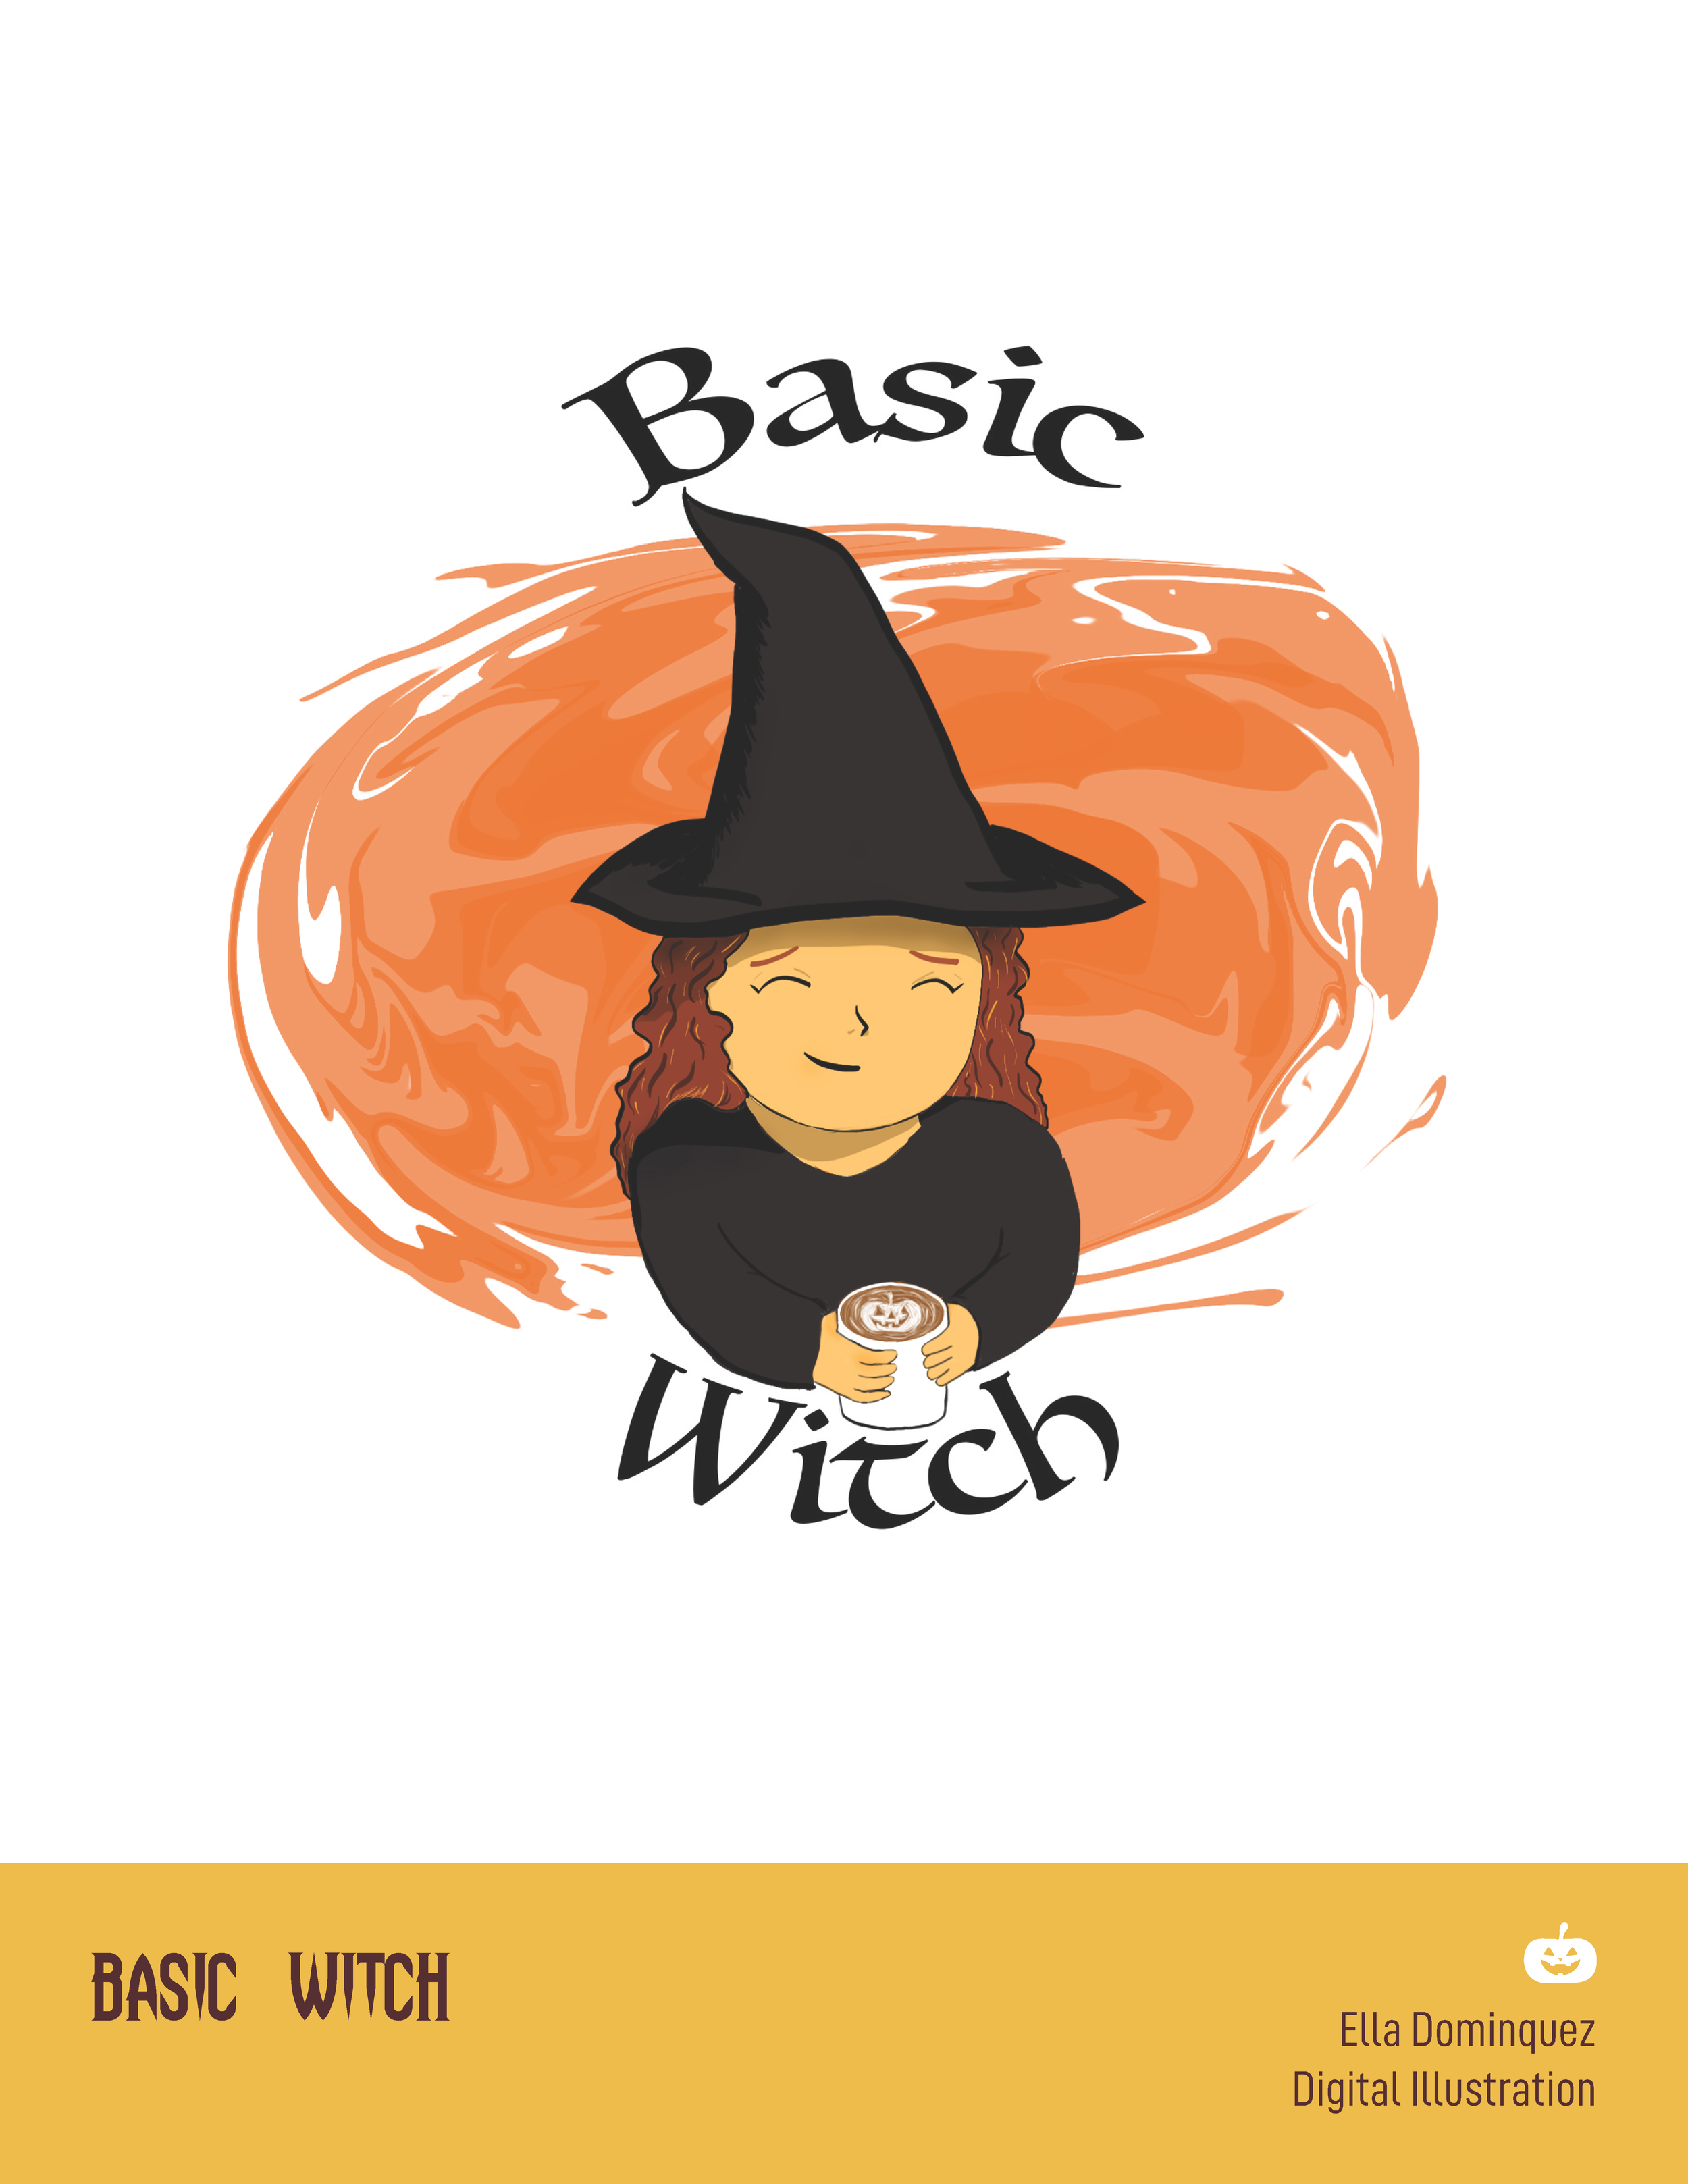 Basic Witch by Ella Dominquez